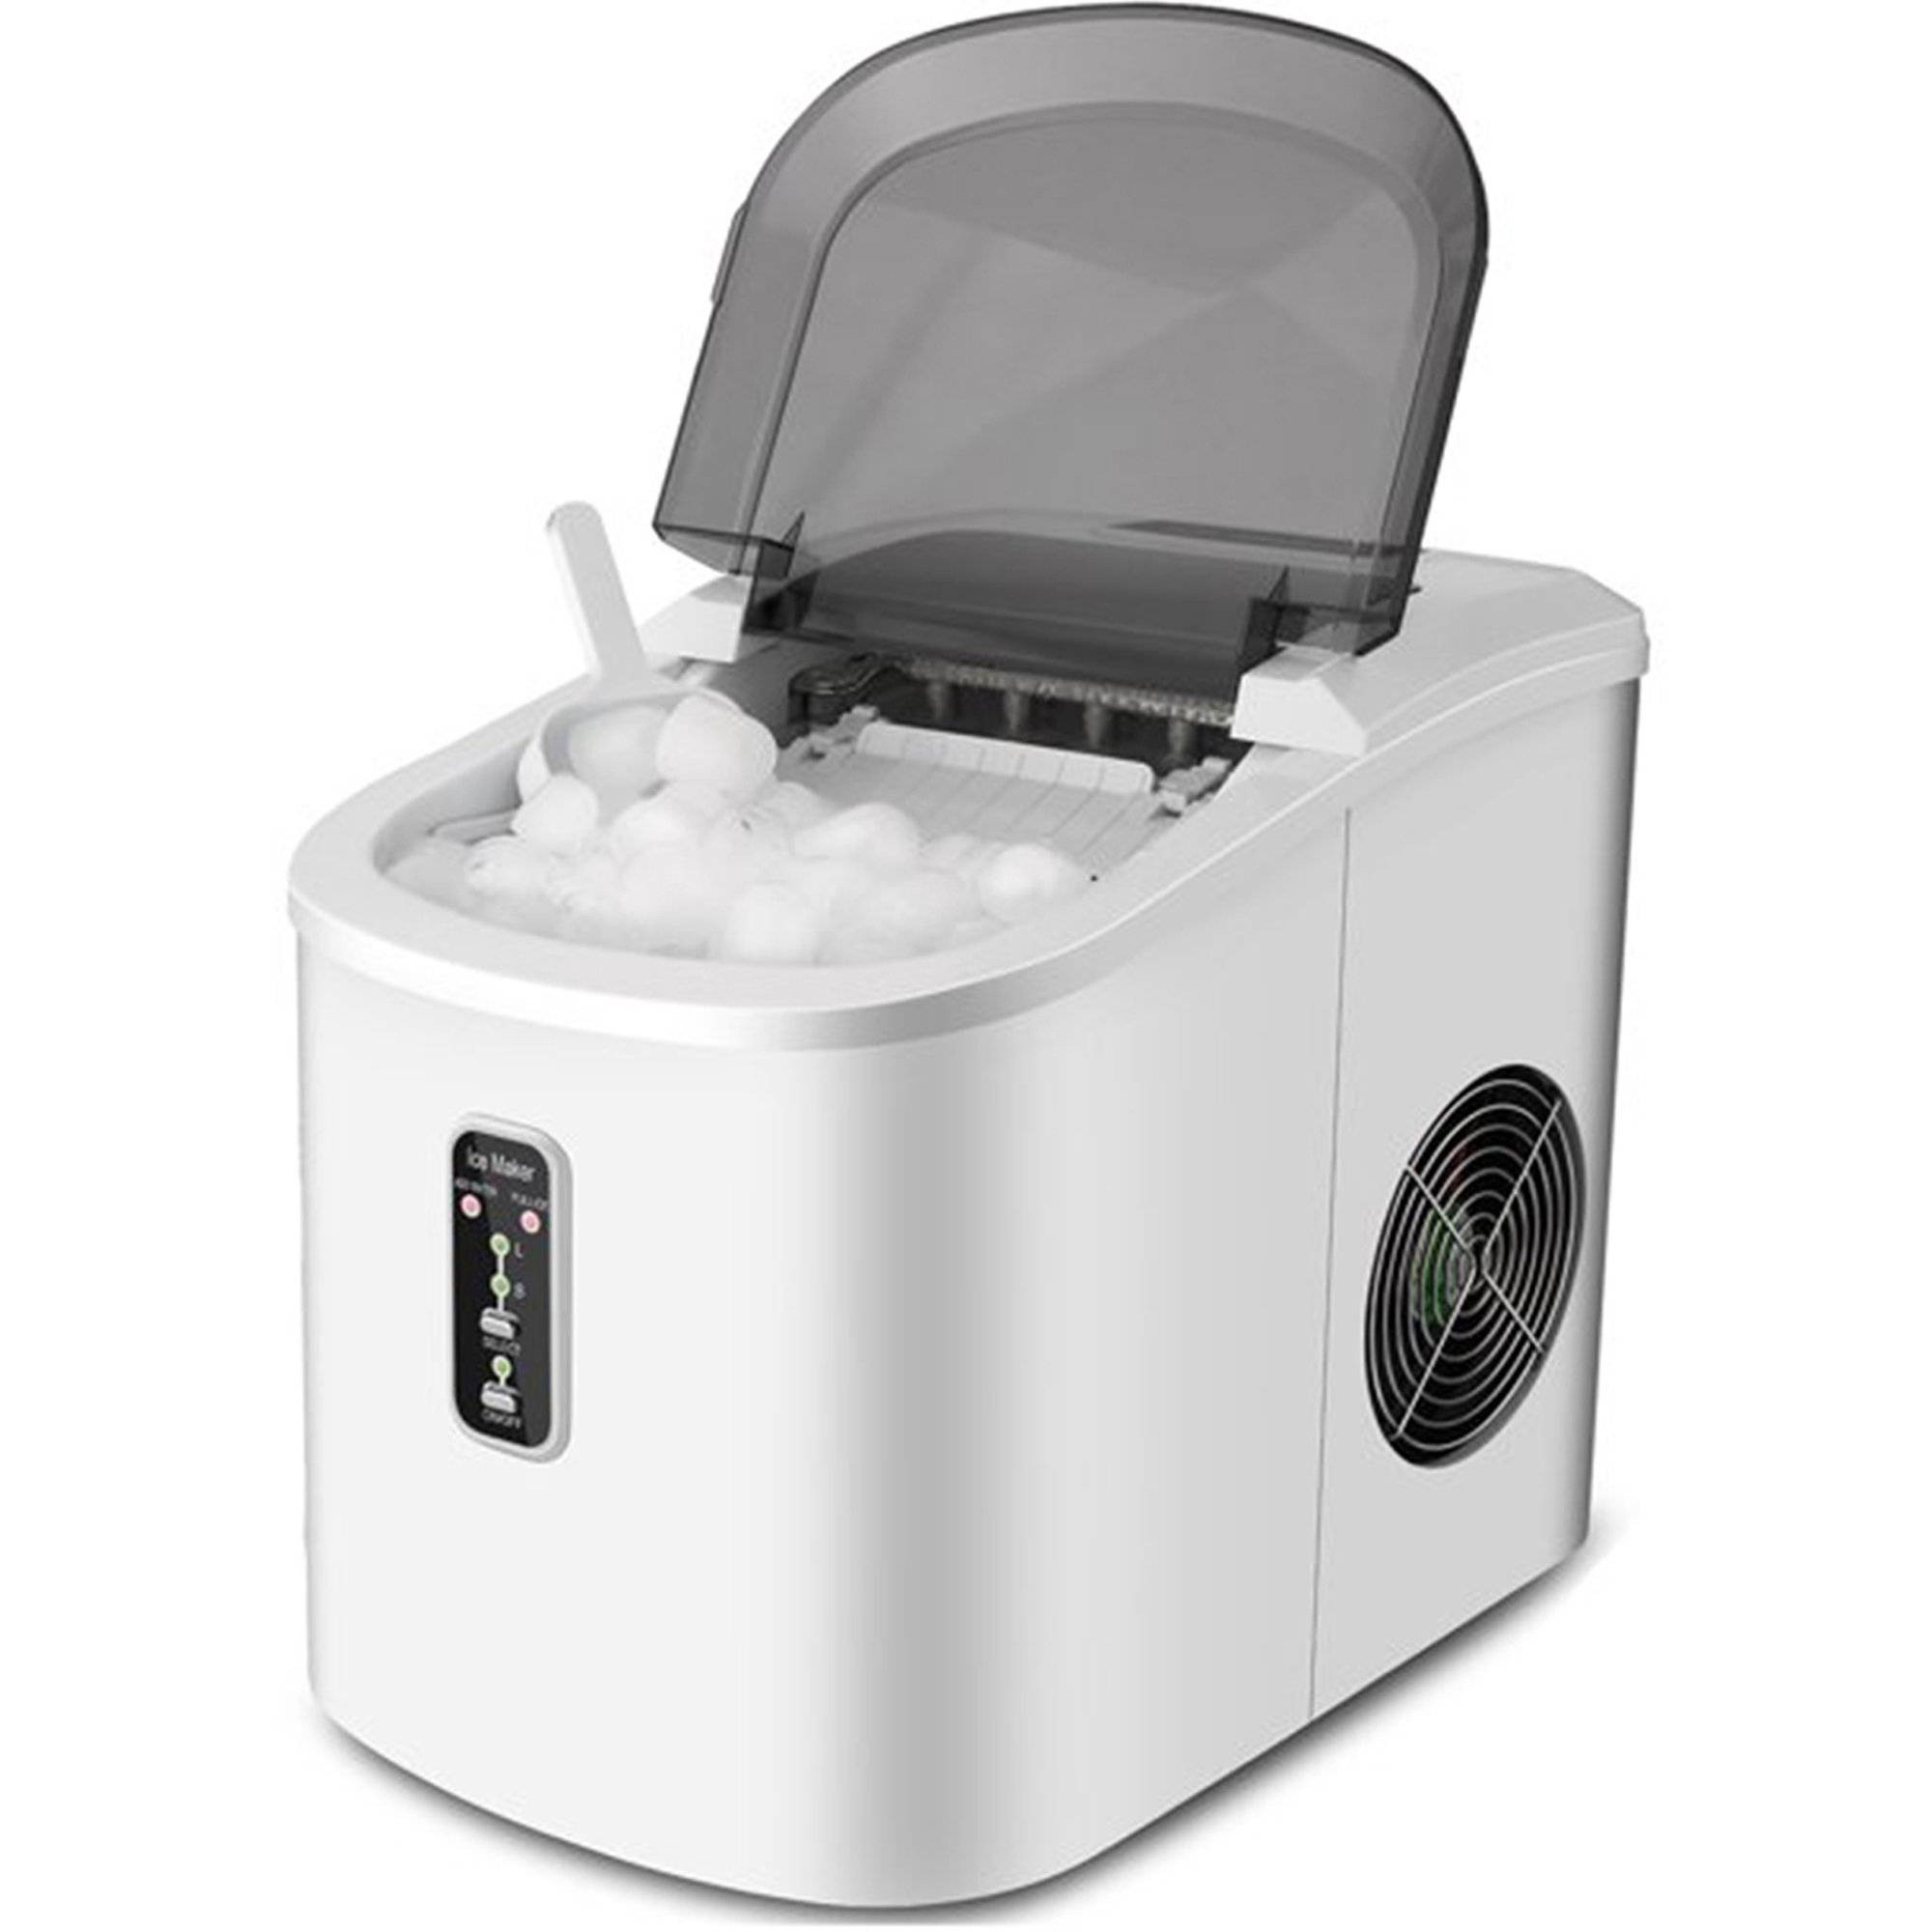 AICOOK Nugget Ice Maker for Countertop, Makes 26lb Nugget Ice per Day, Sonic  Ice Maker Machine, Crunchy Pellet Ice Maker with 5.3lb Ice Bin and Scoop  for Home Office, Self-Cleaning